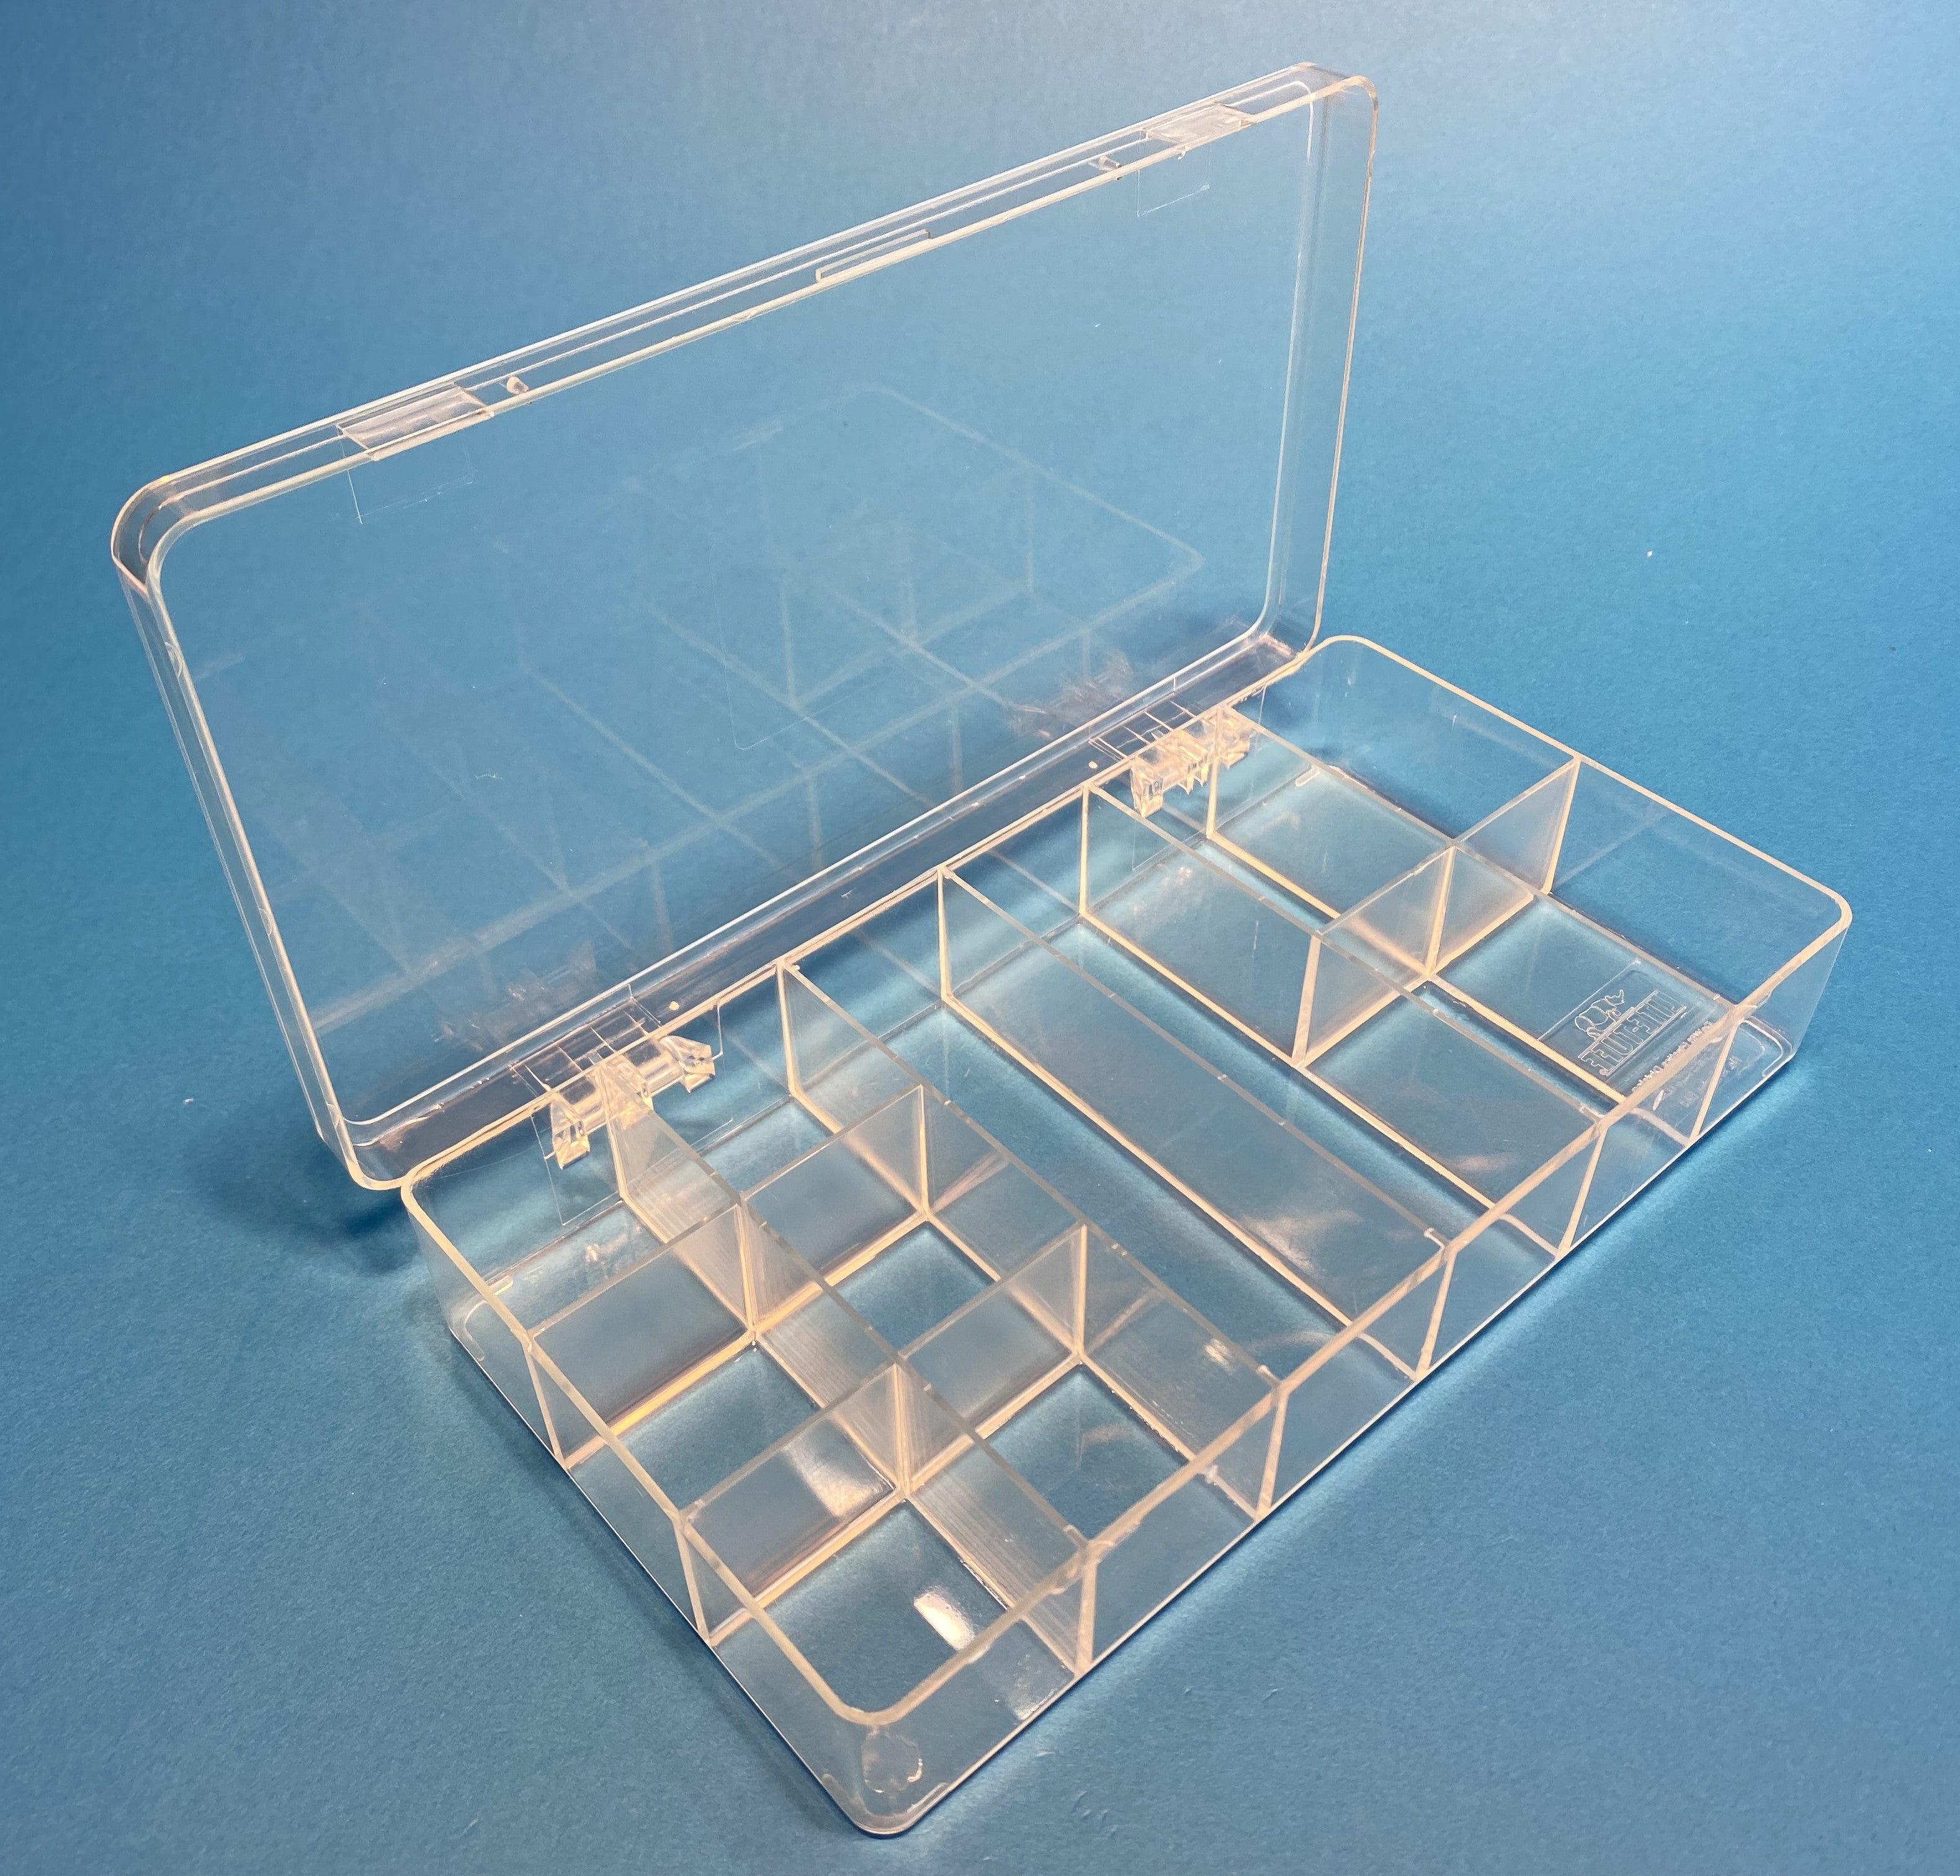 D26 Case, 12 Bays Config 2, Clear Impact-Protected Copolymer (carton of 76 ea)